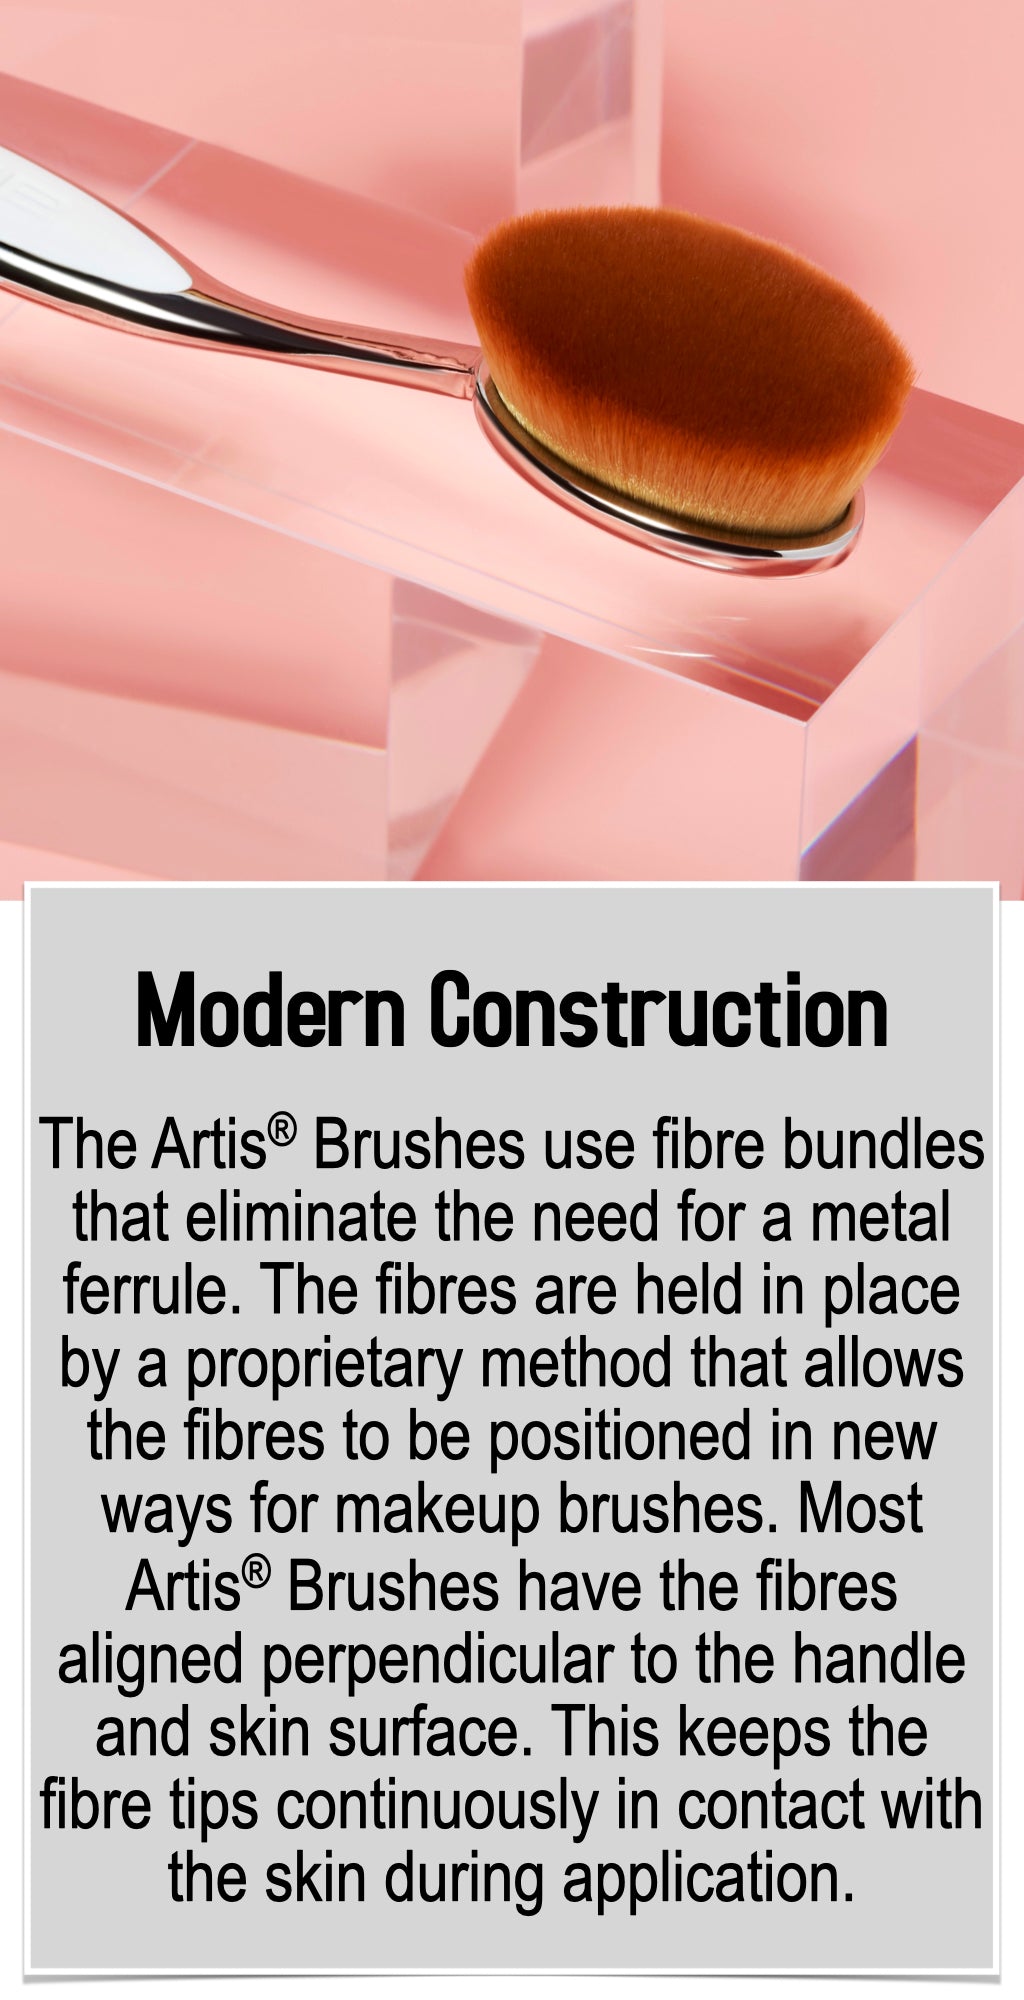 The Artis® Brushes use fibre bundles that eliminate the need for a metal ferrule. The fibres are held in place by a proprietary method that allows the fibres to be positioned in new ways for makeup brushes. Most Artis® Brushes have the fibres aligned perpendicular to the handle and skin surface. This keeps the fibre tips continuously in contact with the skin during application.